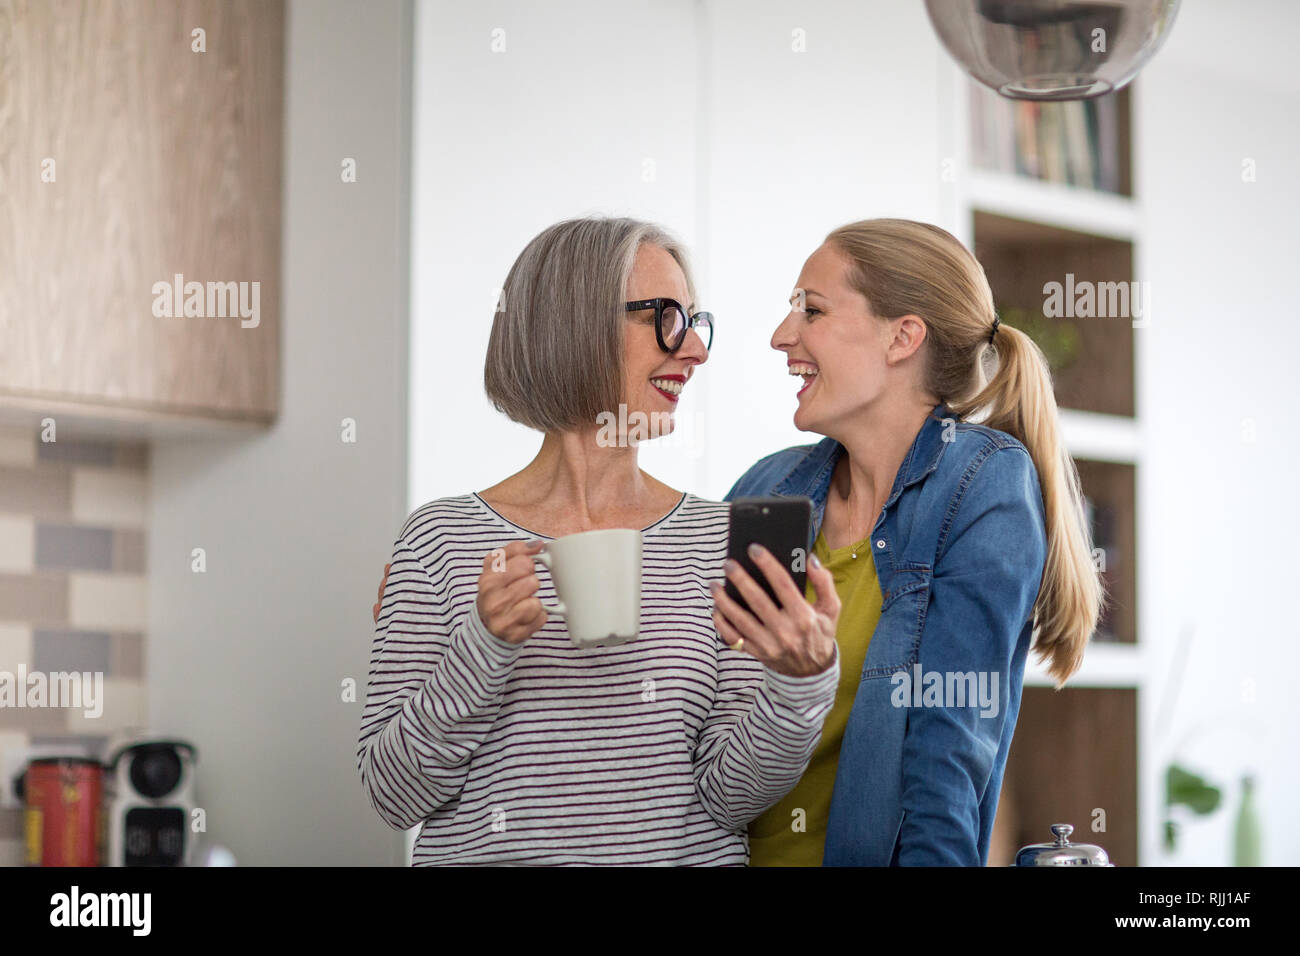 Mature adult woman with grown up daughter looking at smartphone in kitchen Stock Photo